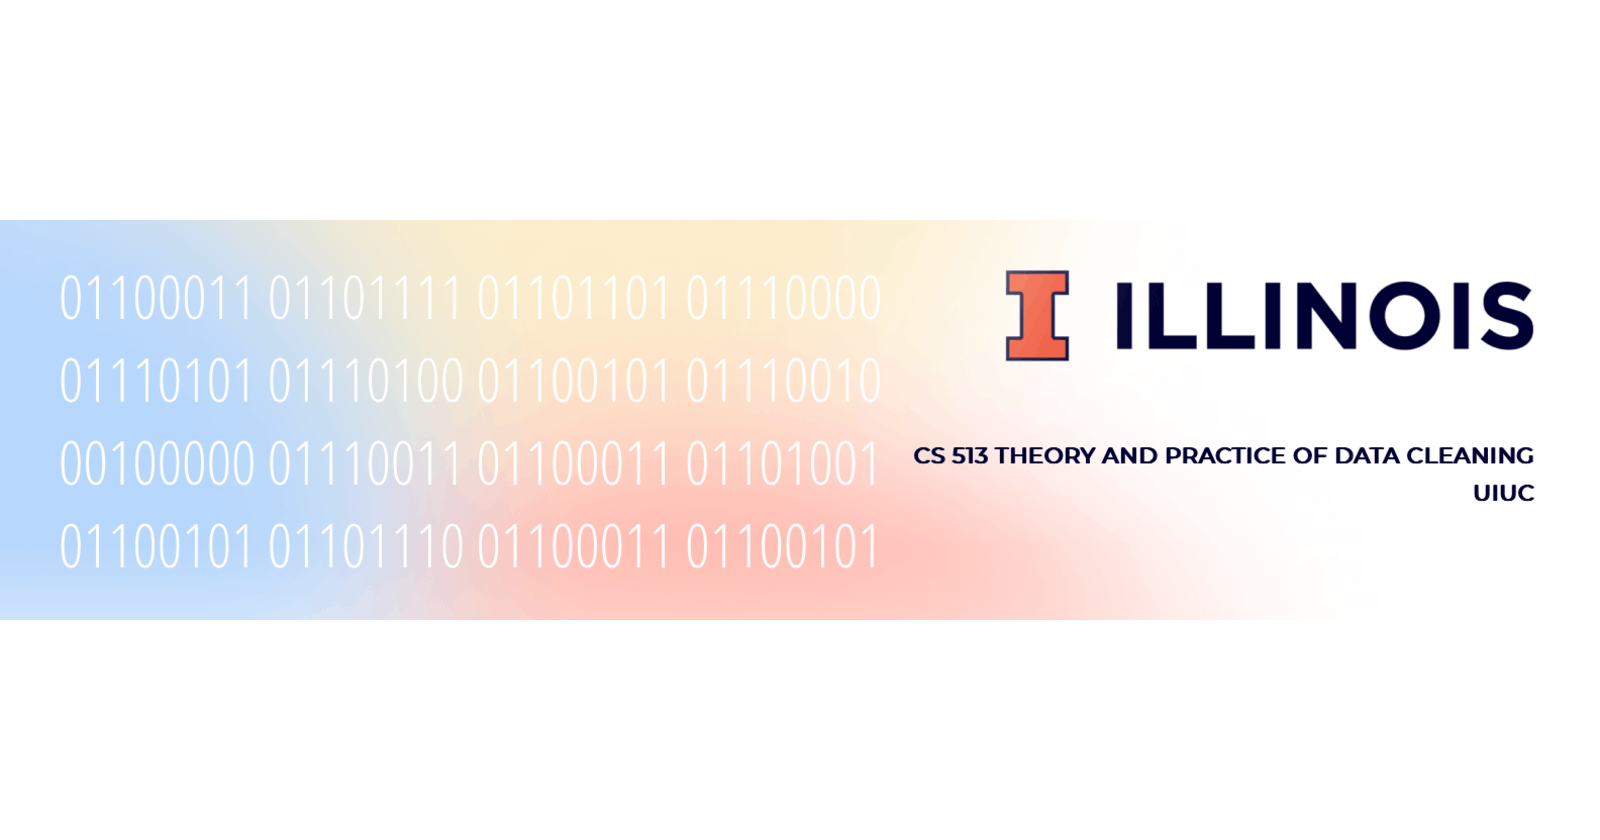 UIUC MCS - CS 513 Review - Theory and Practice of Data Cleaning